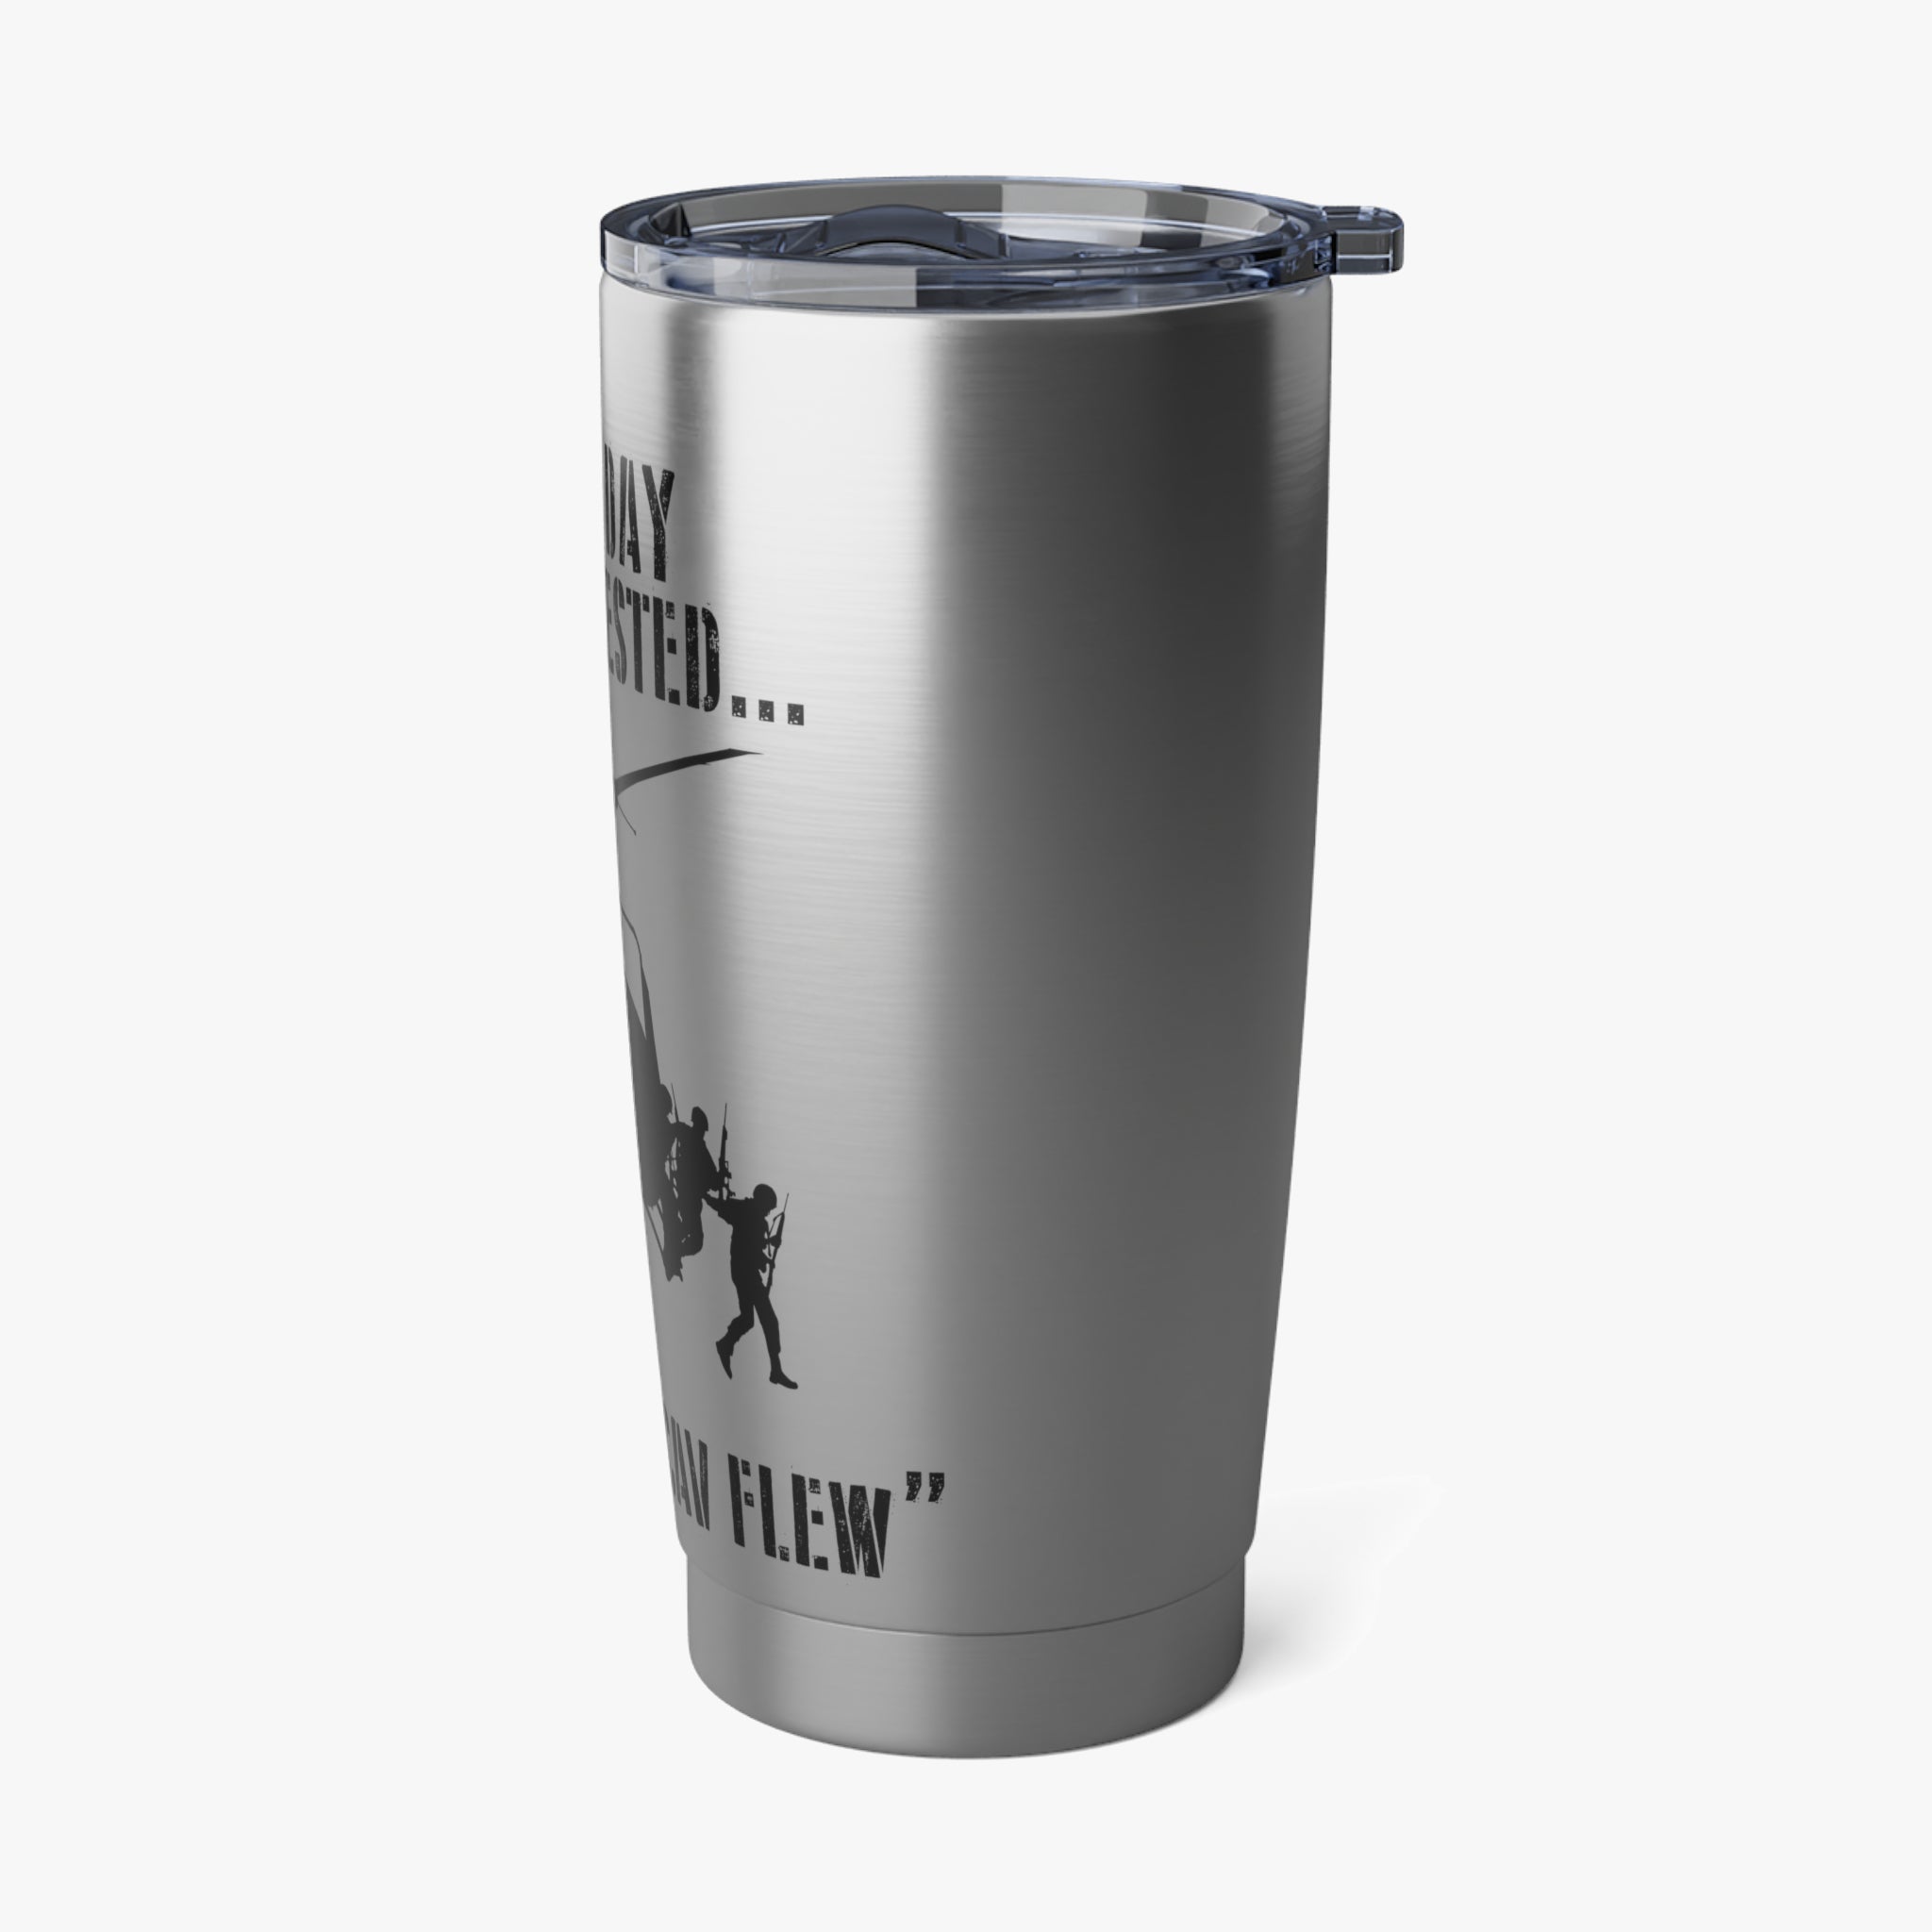 "On the 7th Day the Lord rested, but the Cav Flew" Inspired 20oz (590ml) Stainless Steel Tumbler - I Love a Hangar